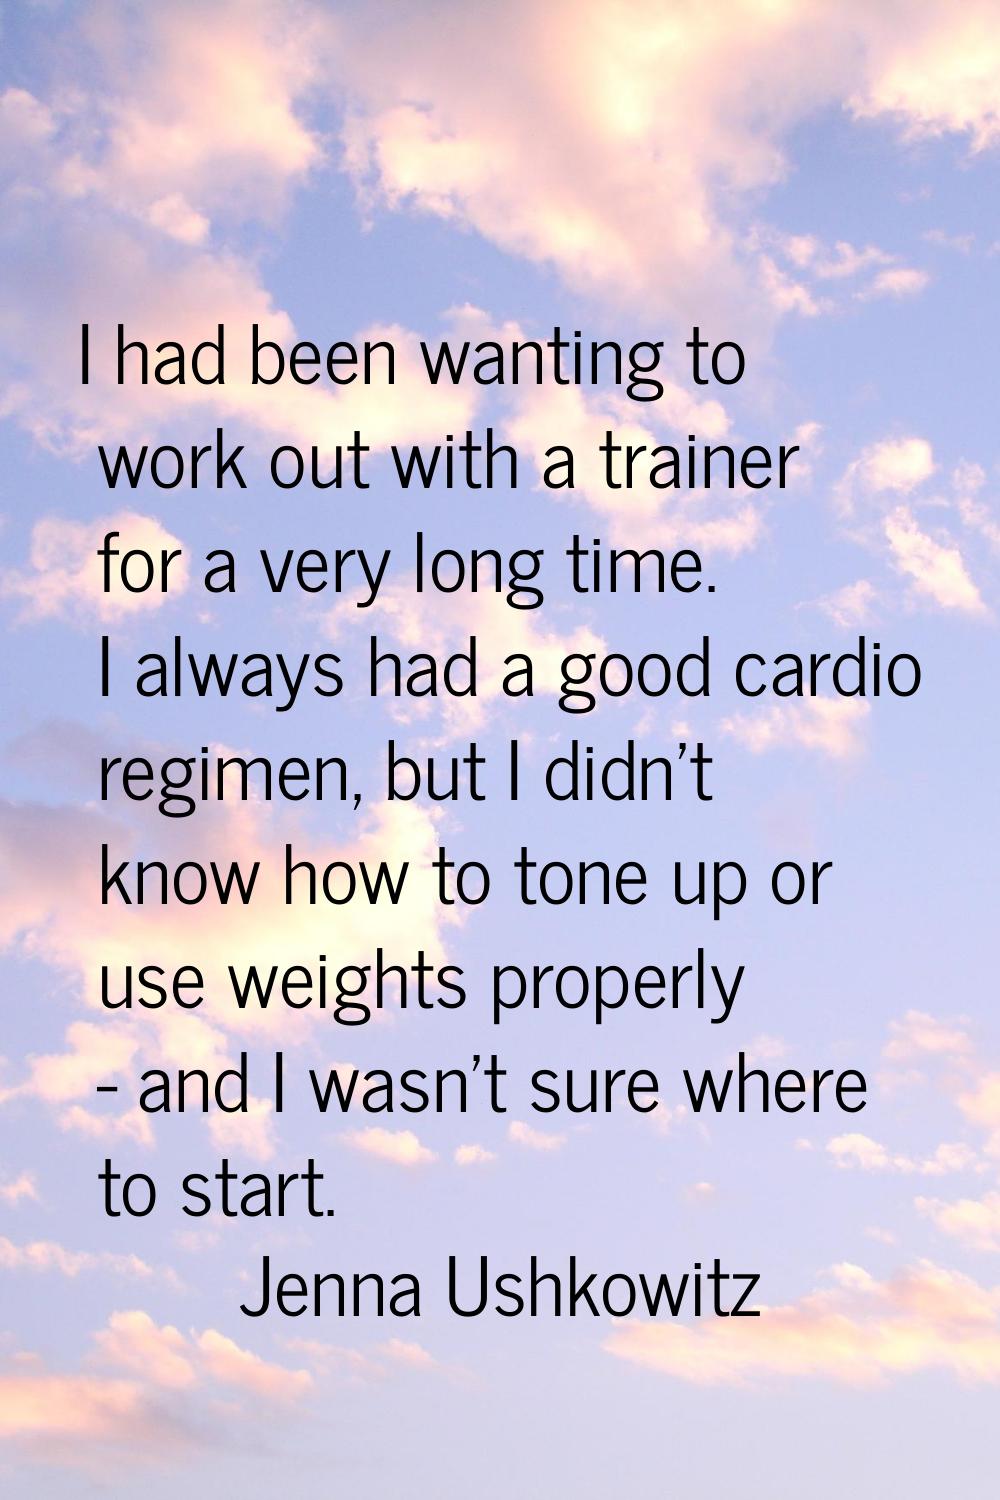 I had been wanting to work out with a trainer for a very long time. I always had a good cardio regi